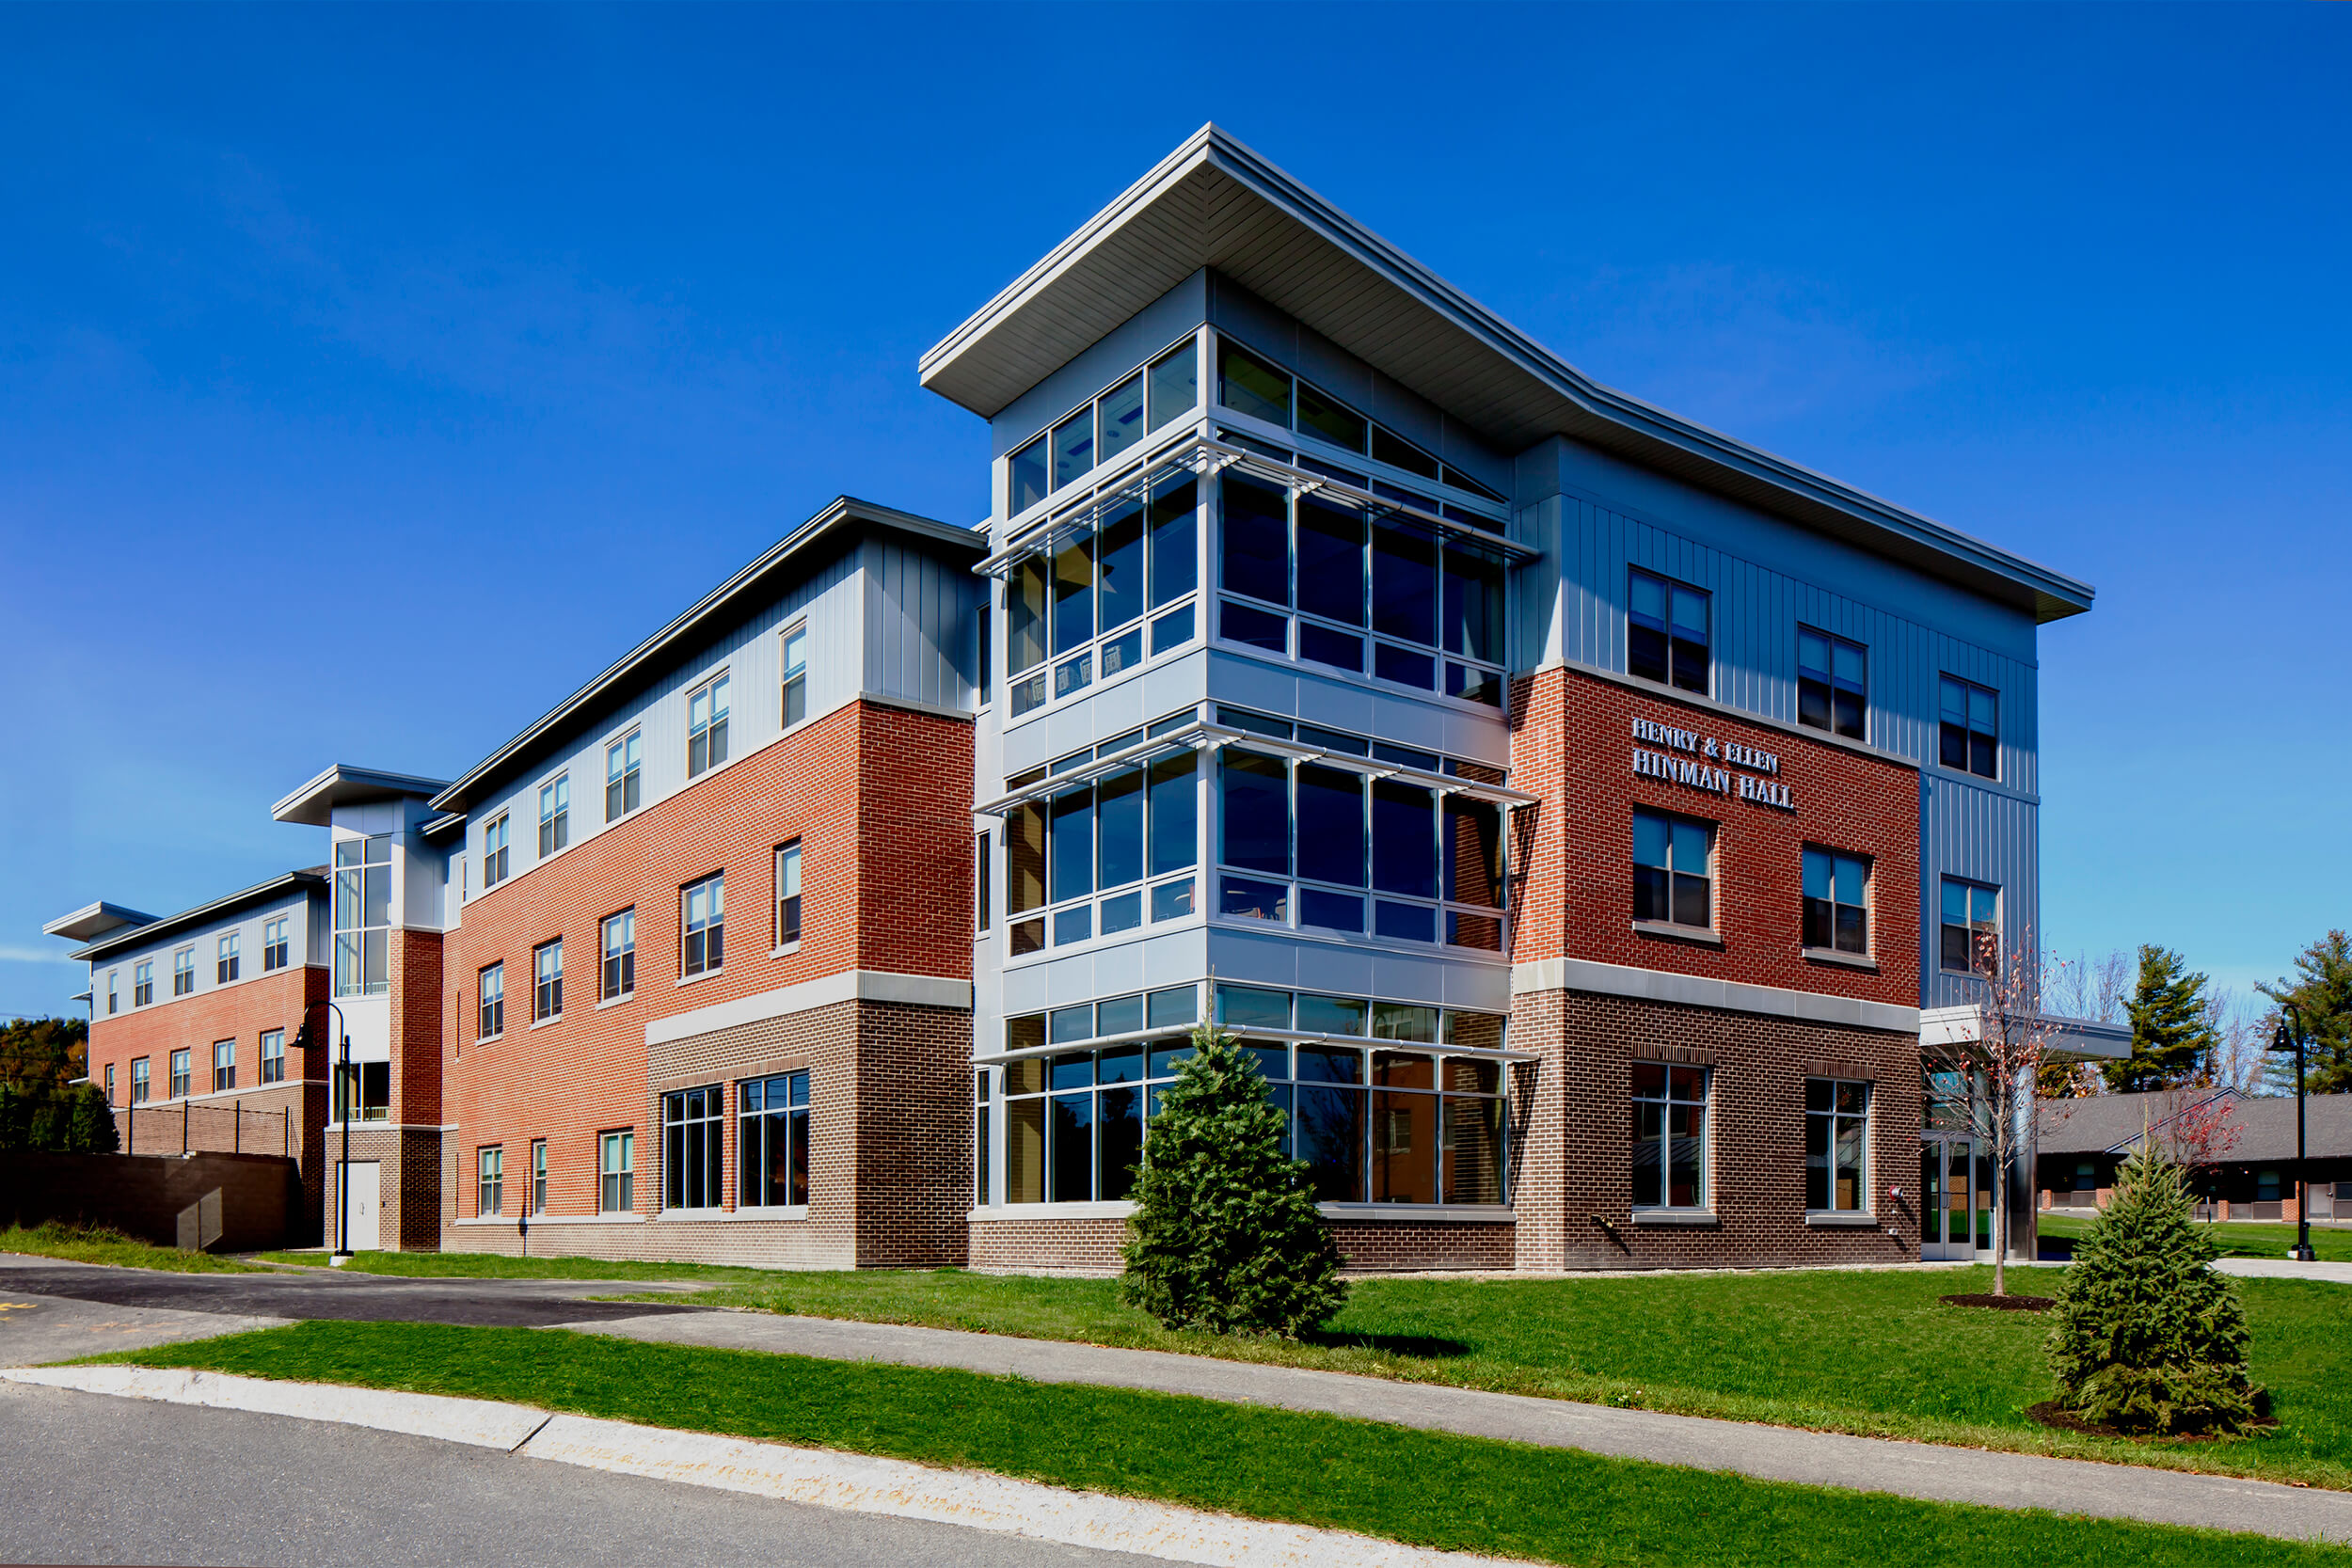 Exterior daytime photo of a college campus student residence building. The building features multiple stories and a brick facade with the axis corner having large glass windows.